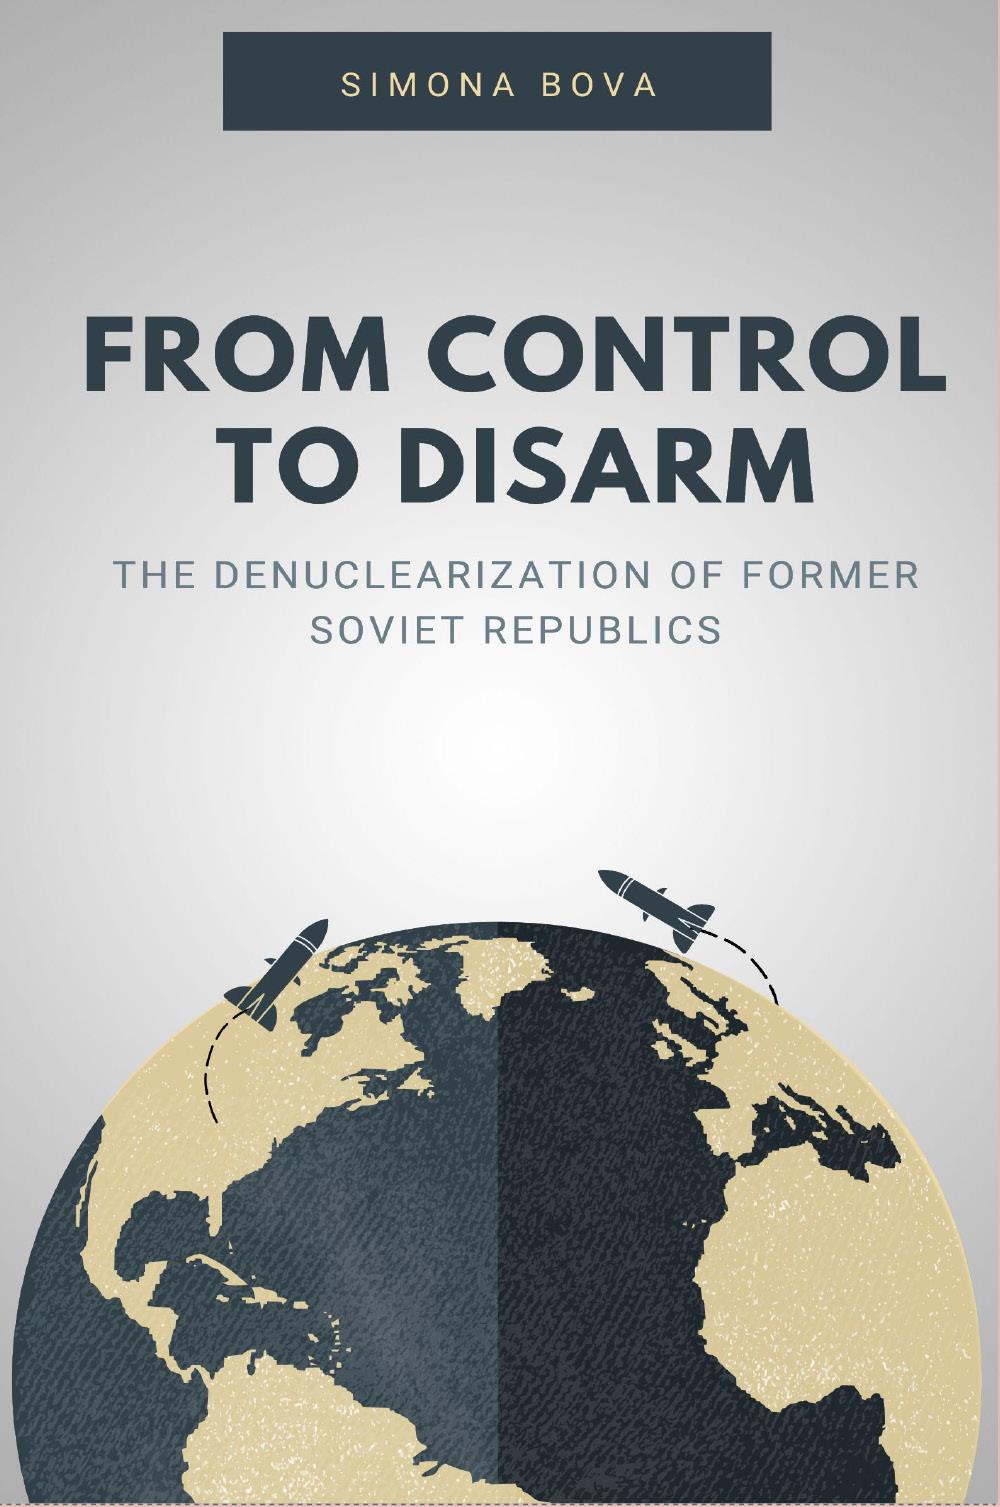 From Control to Disarm